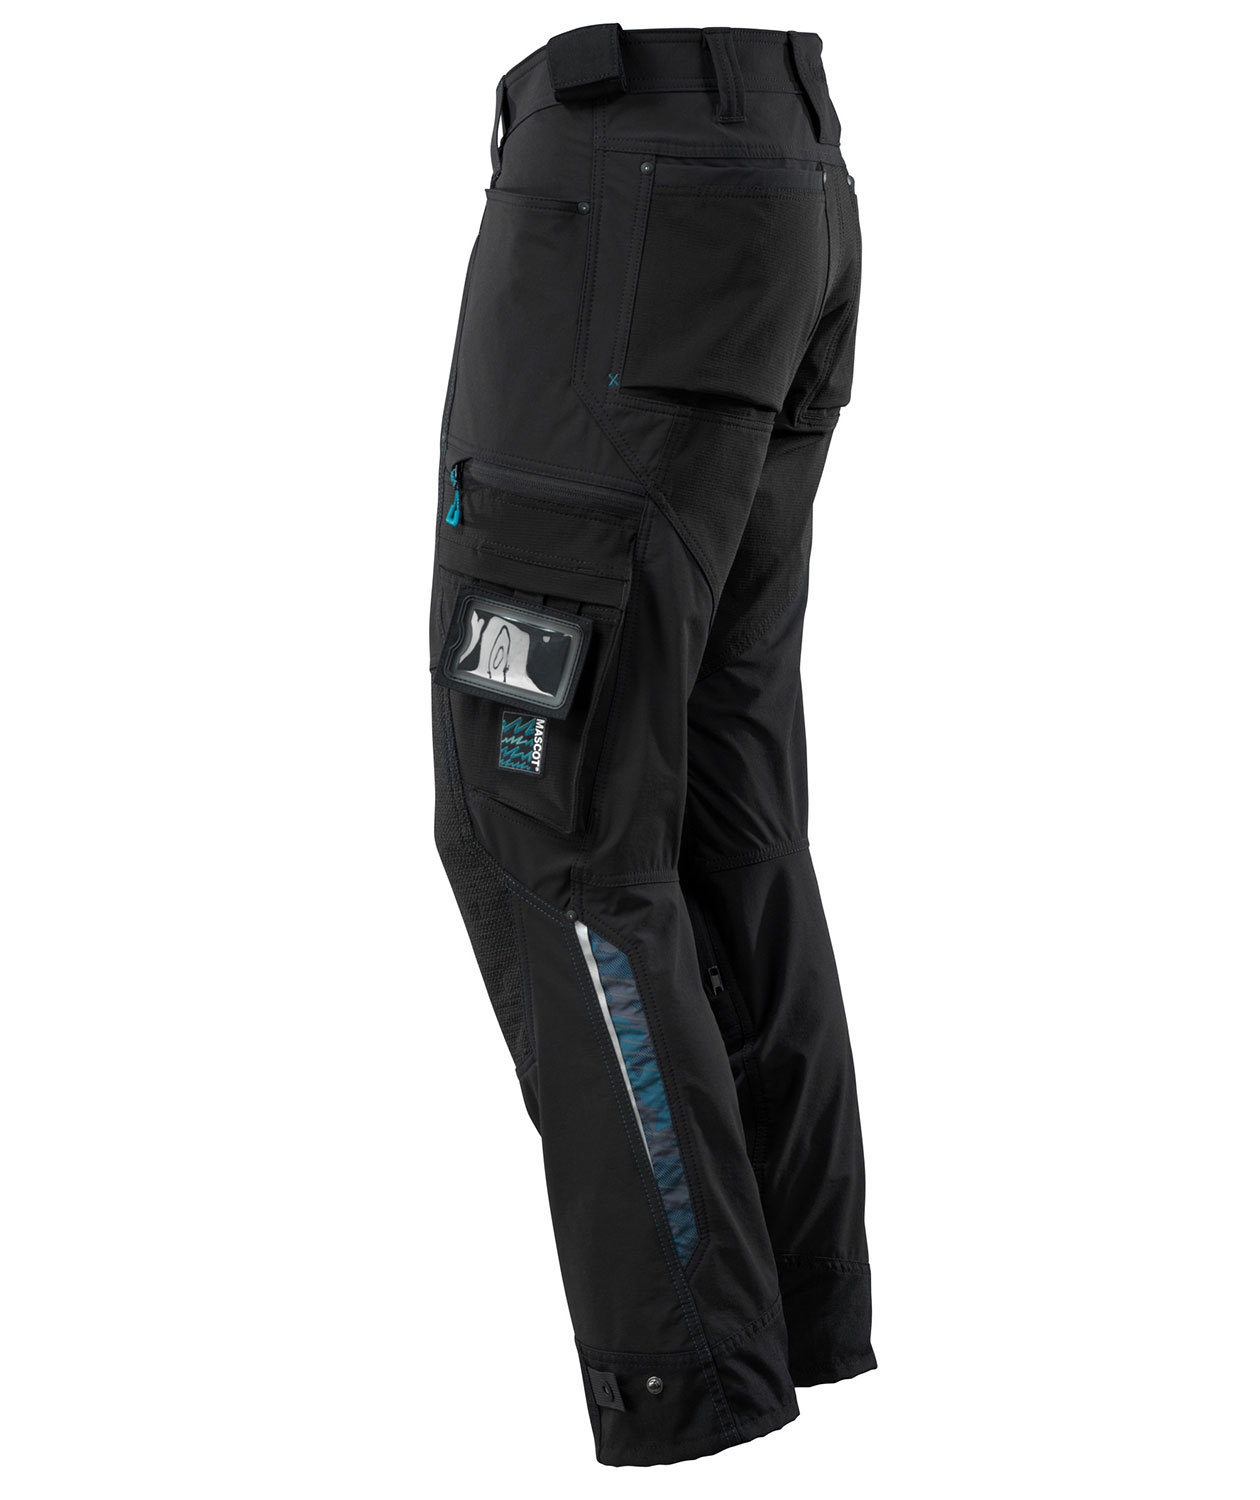 Mascot Workwear 17079 Advanced Trousers with kneepad pockets  Clothing  from MI Supplies Limited UK